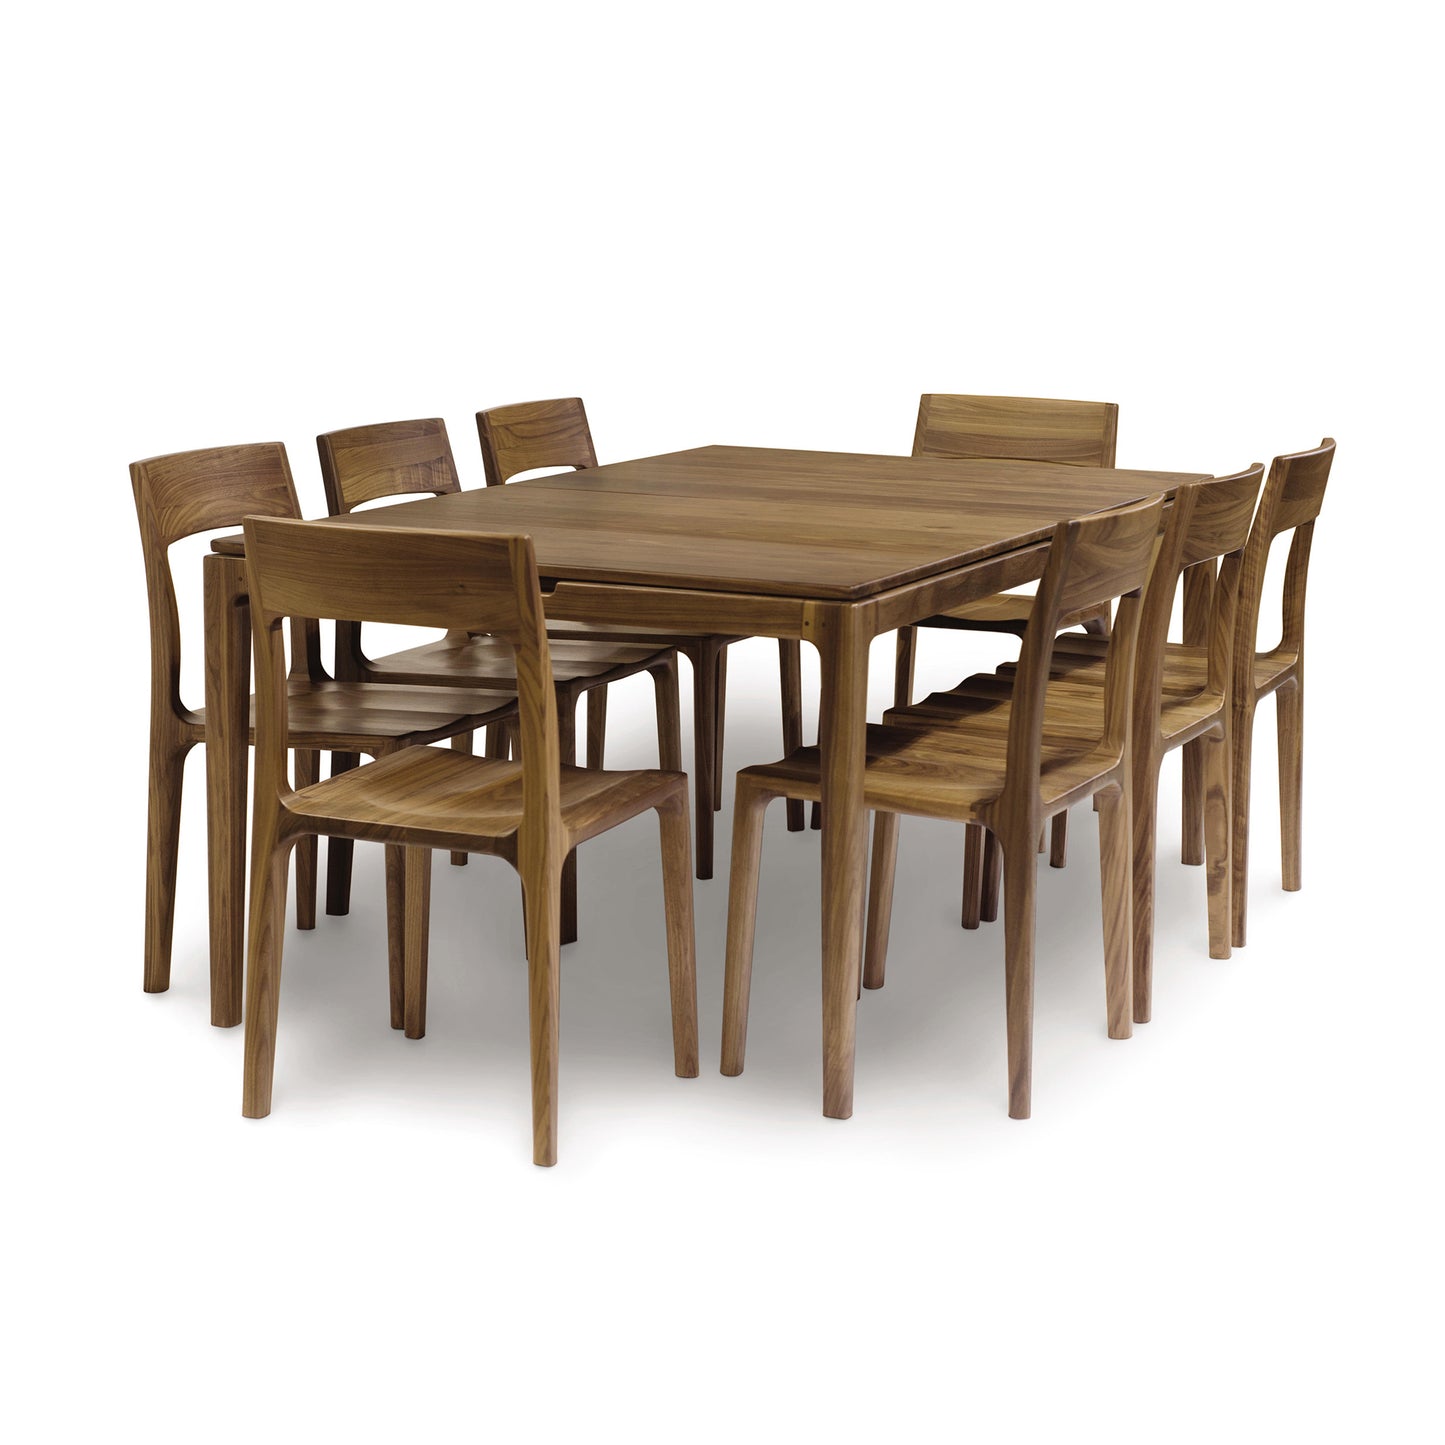 A Copeland Furniture Lisse Extension Dining Table set with eight matching chairs on a plain background.